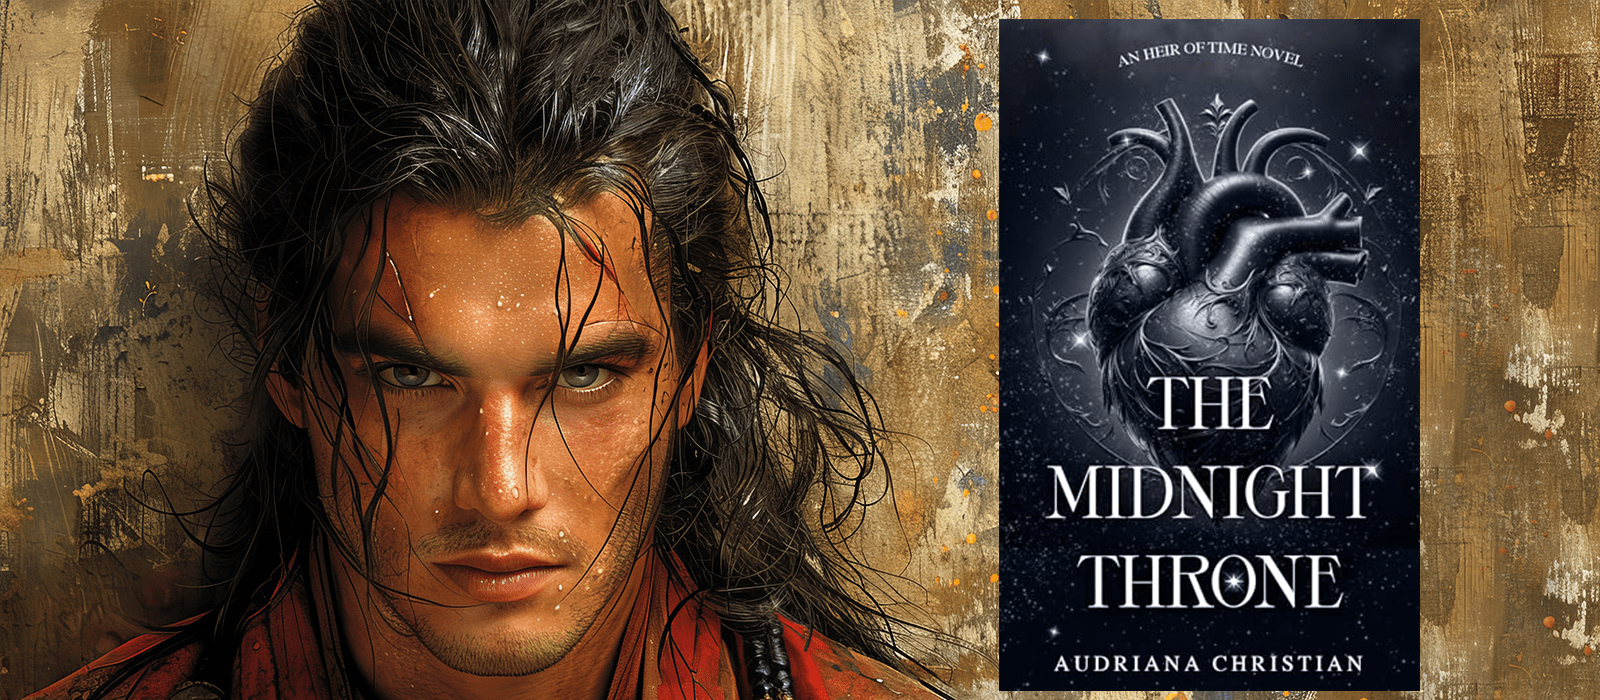 The Midnight Throne by Audriana Christian